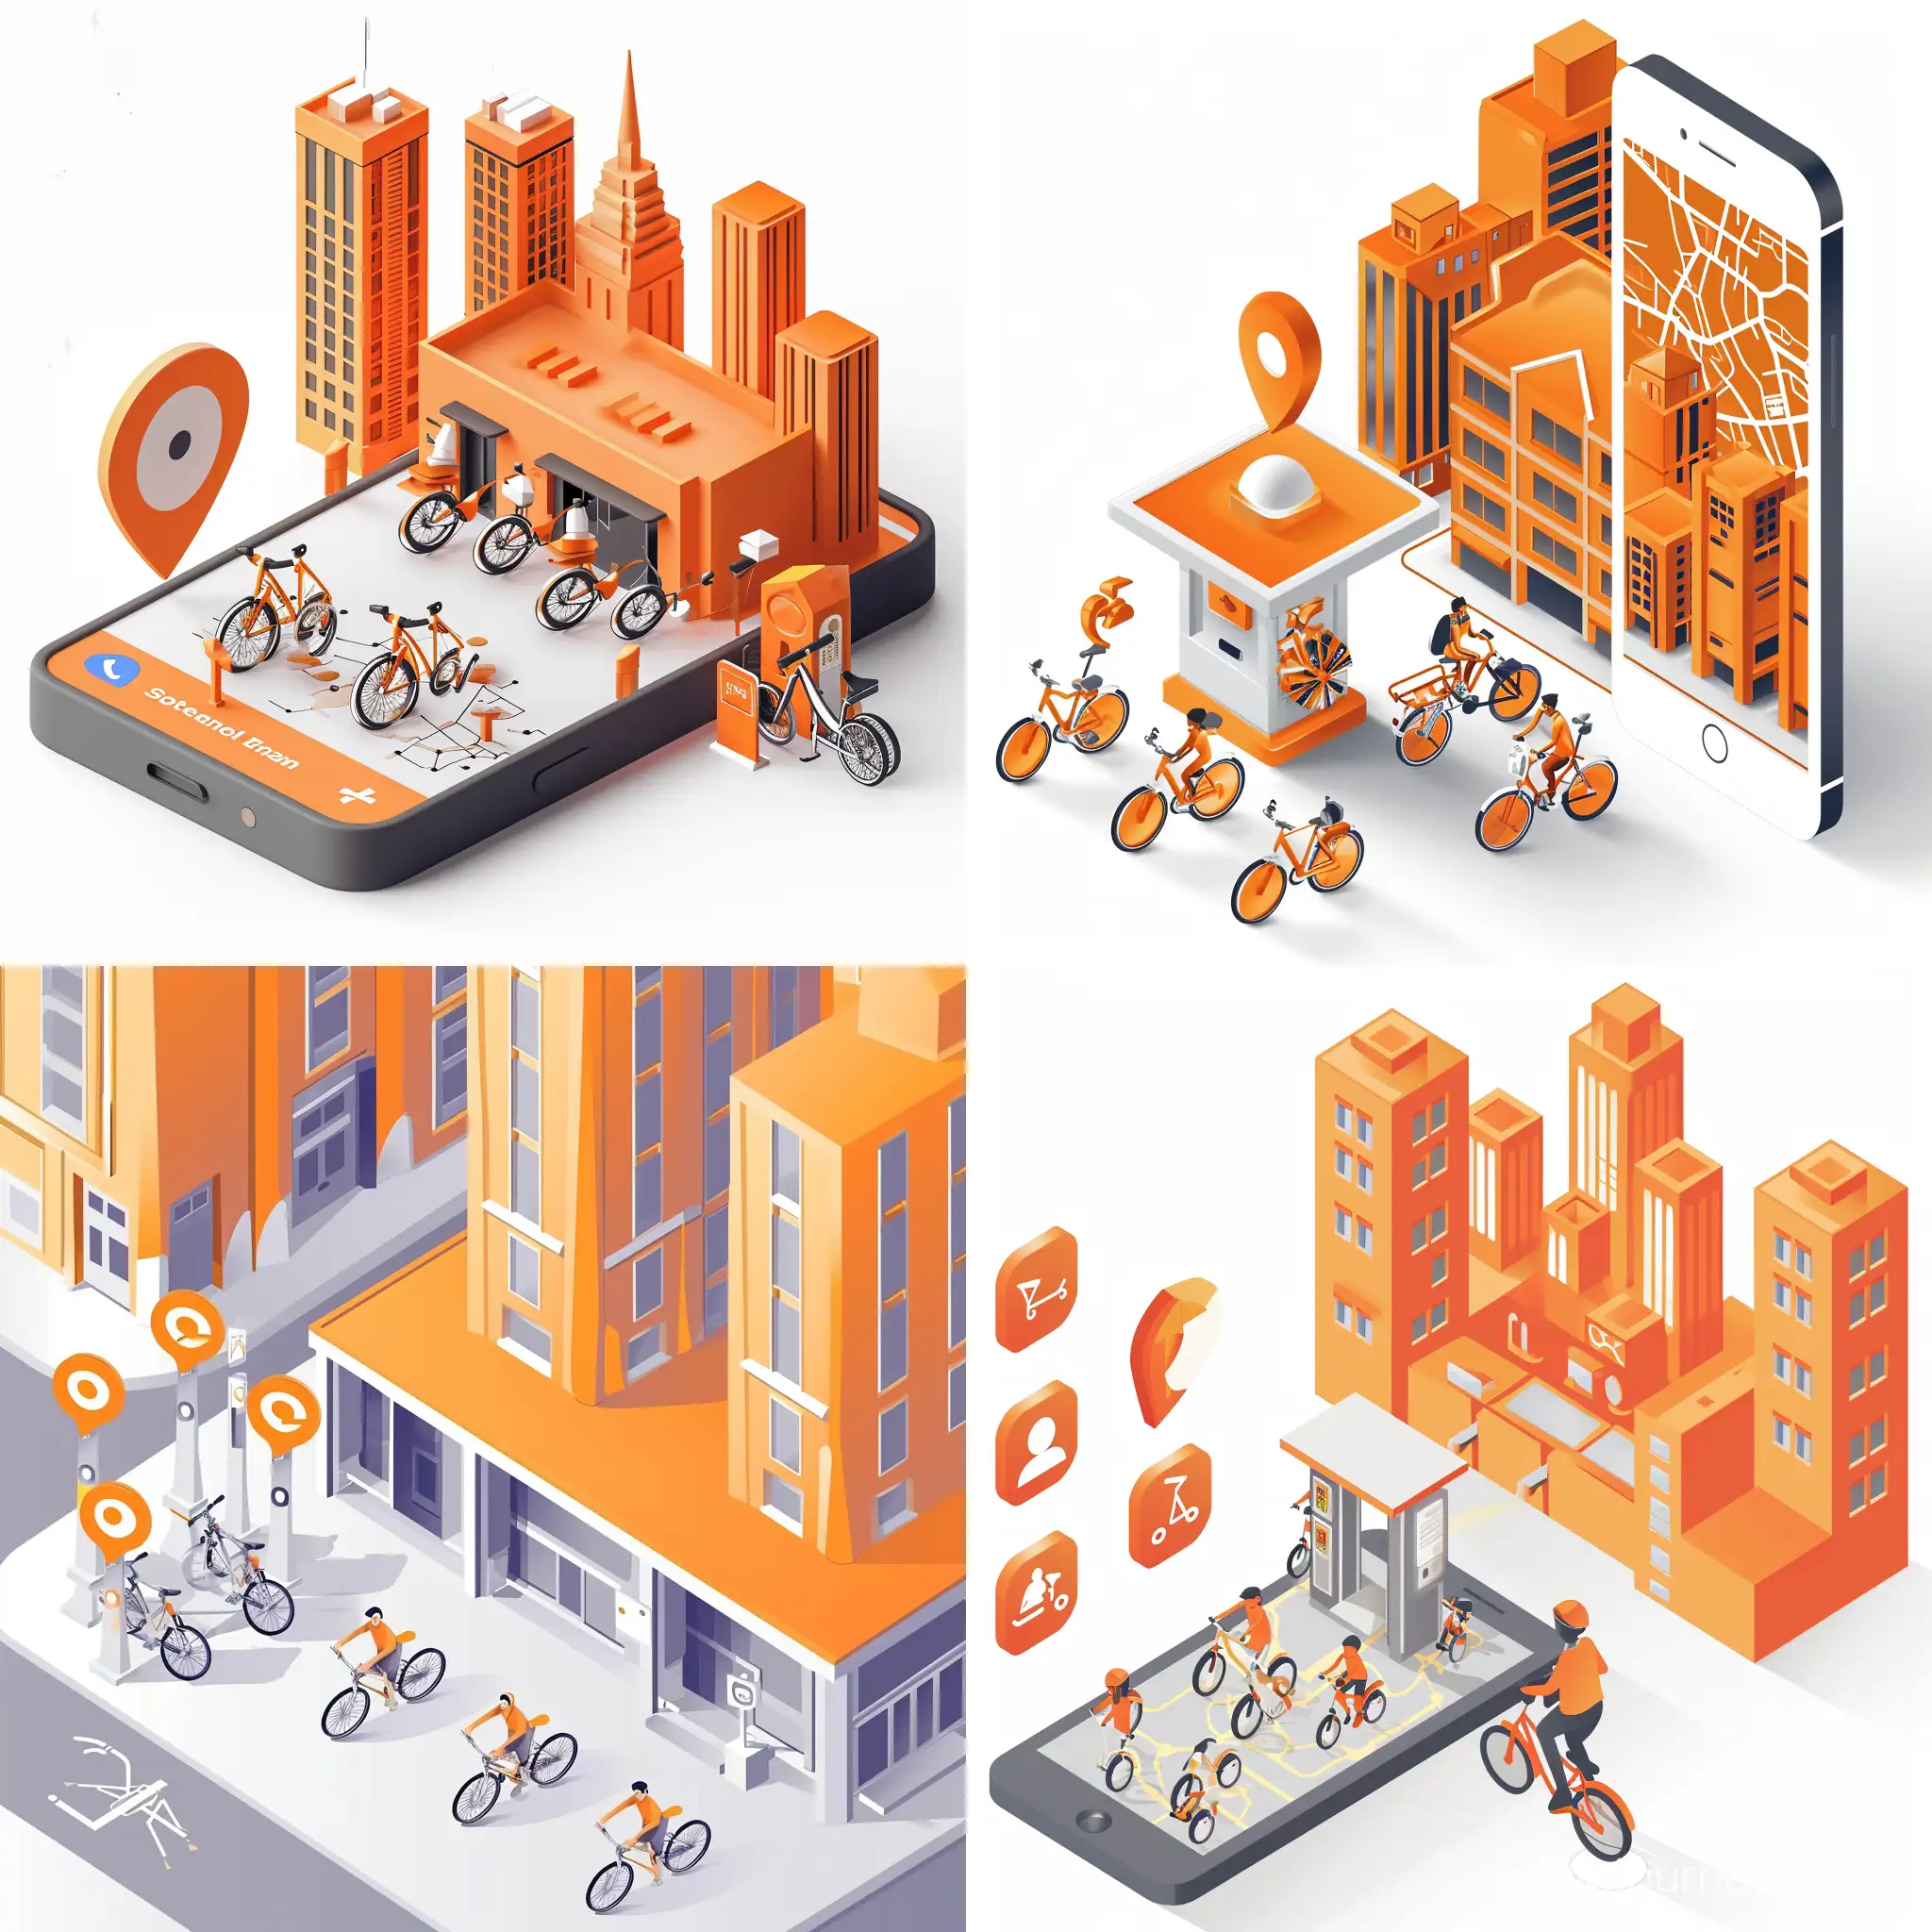 A bike rental station inside the university on the left side of the mobile image with the location icon in map city and the image wide and tall orange buildings and high-altitude image. 5 bicycles should be parked at the station and one bicycle should be ridden by a student